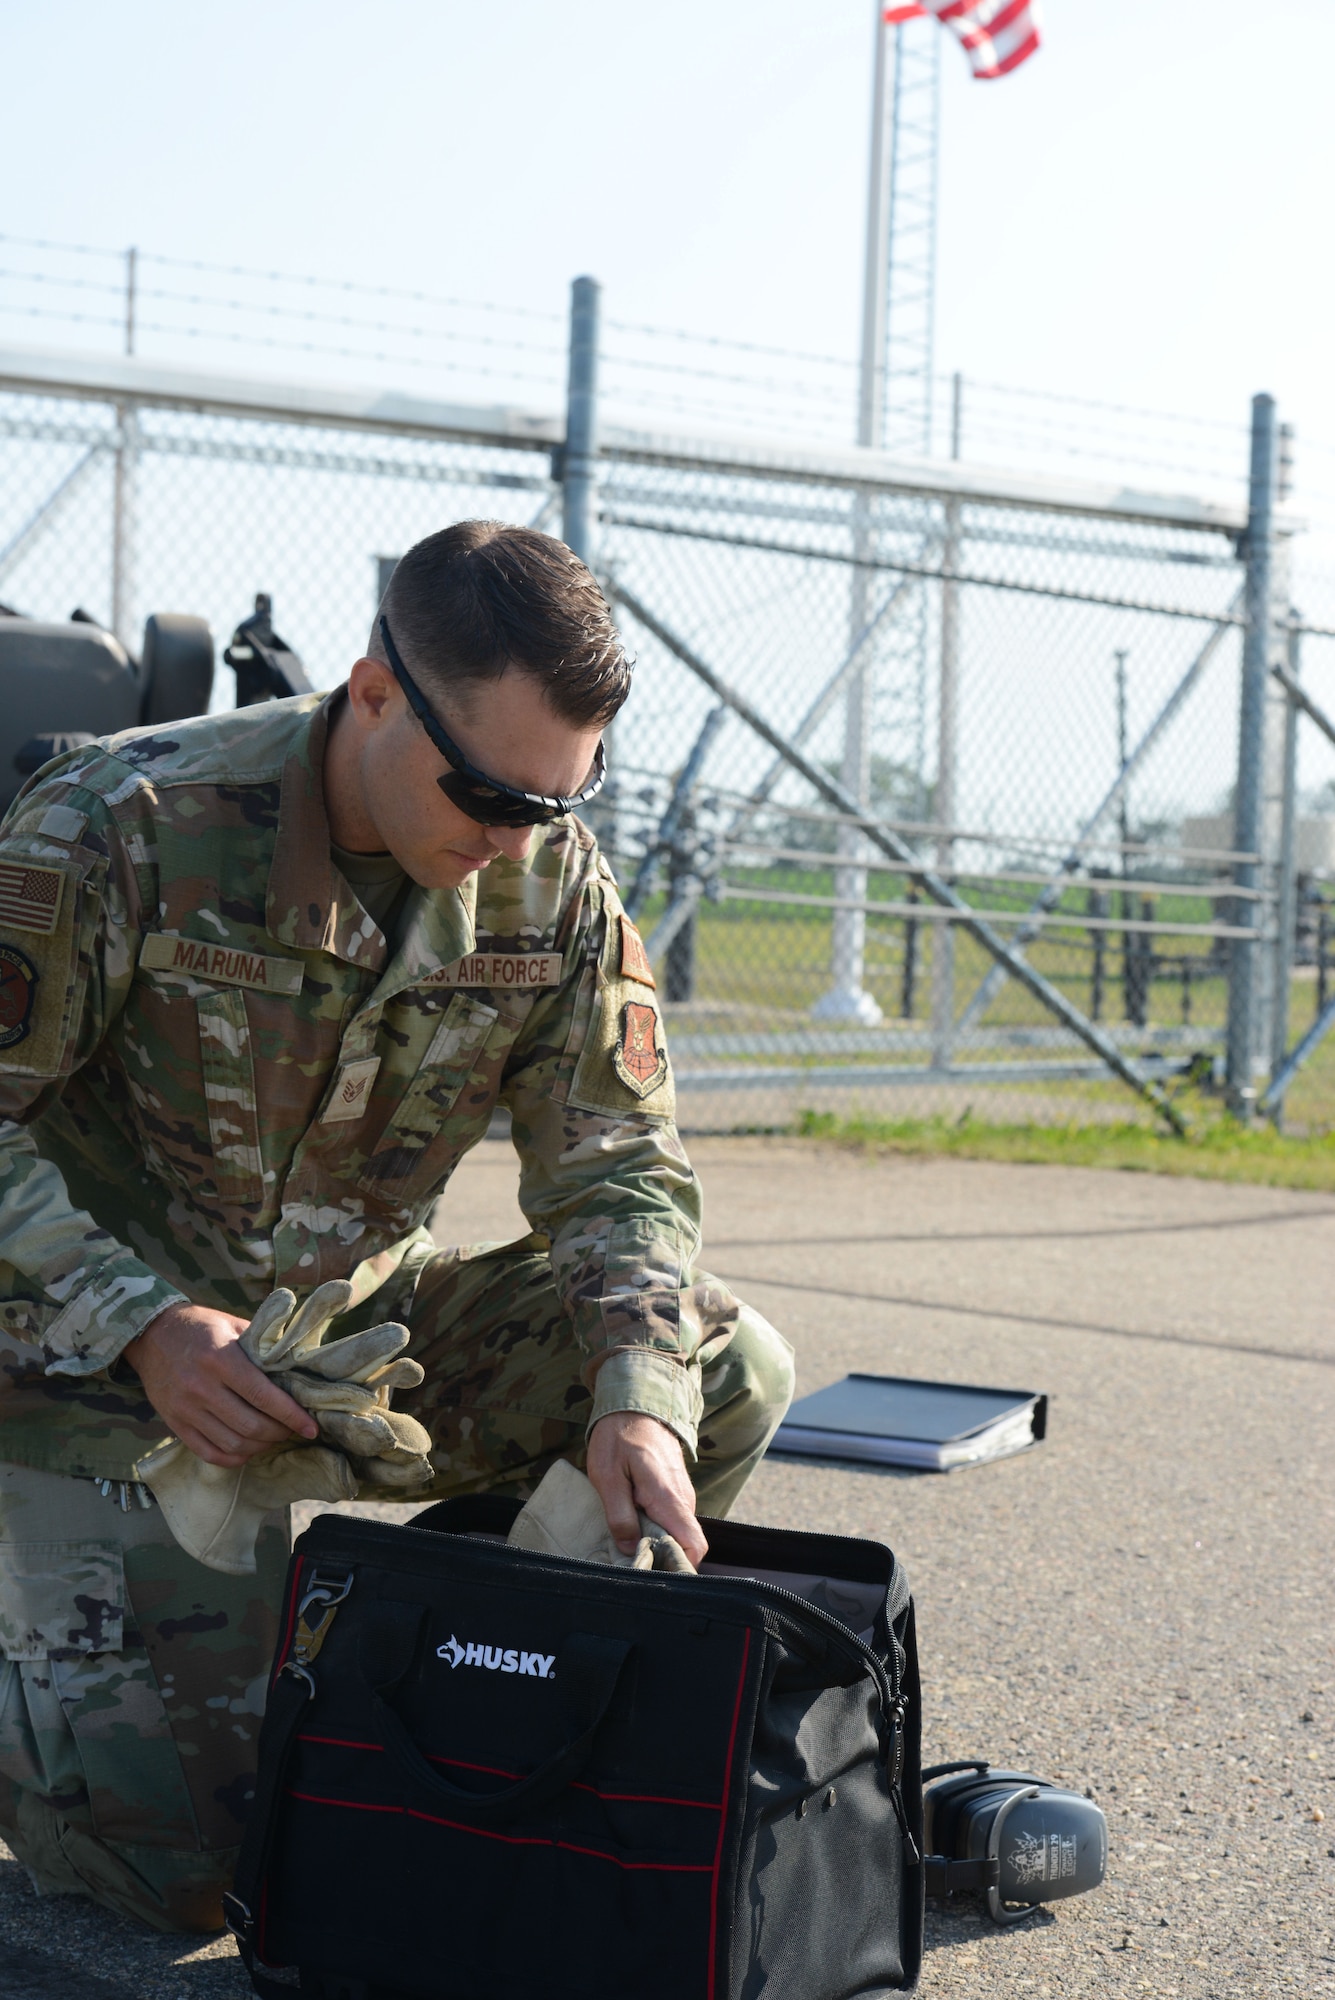 U.S. Air Force Staff Sgt. Edward Maruna, 742nd Missile Squadron facility manager, prepares for his daily equipment check at Minot Air Force Base, North Dakota, July 7, 2023. As the facility manager, Maruna is responsible for the functionality and maintenance of the equipment on the missile site. Missile sites are essential to the United States’ strategy of nuclear deterrence. (U.S. Air Force photo by Airman 1st Class Trust Tate)